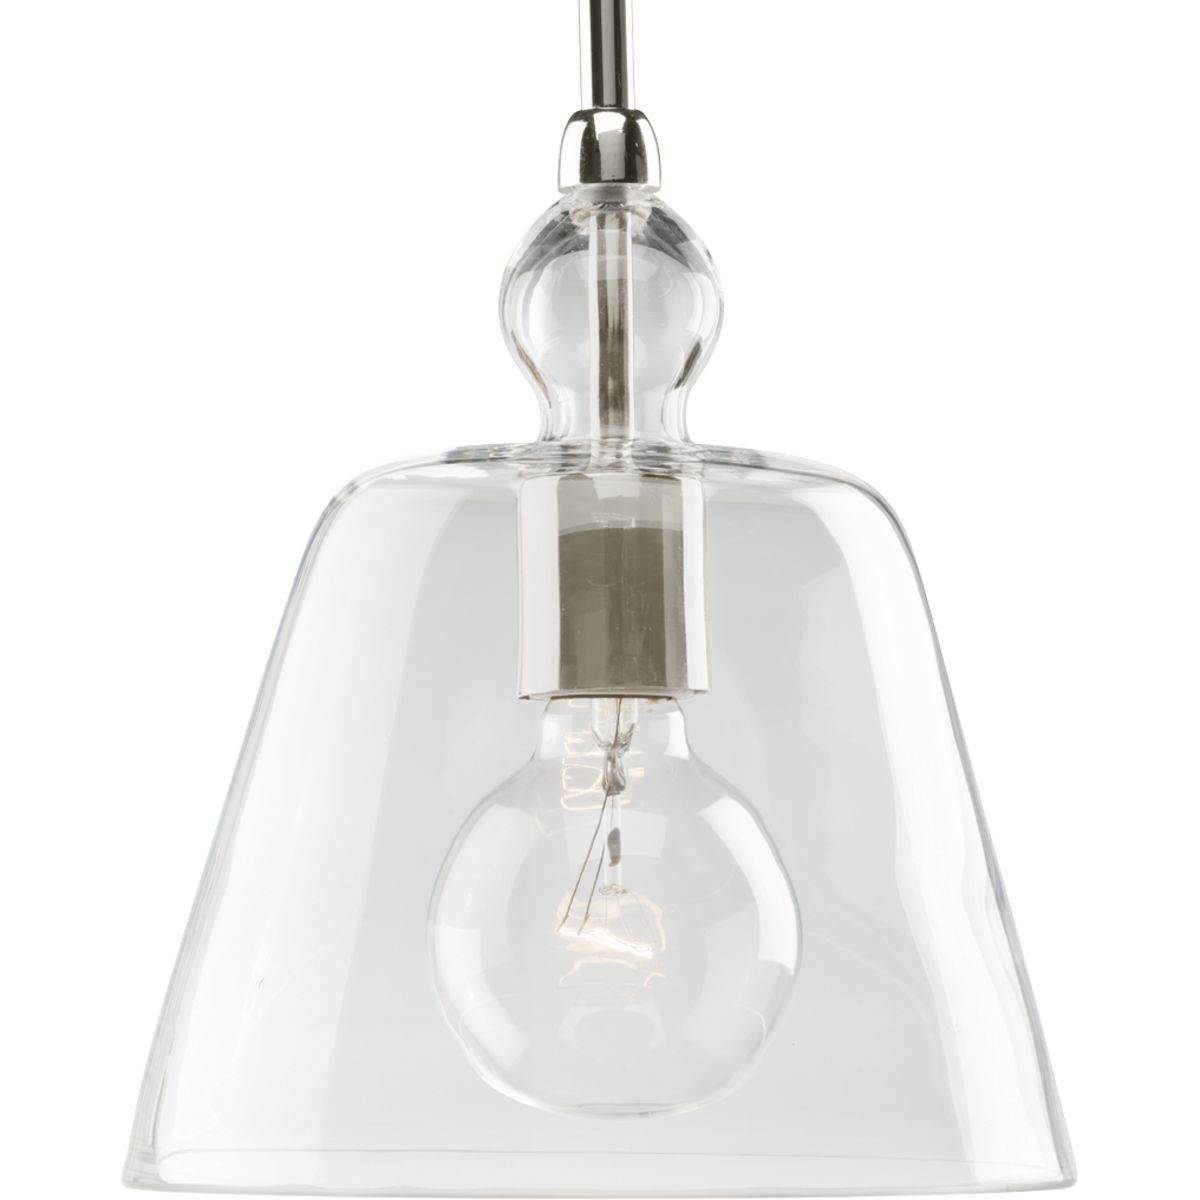 One-light stem hung mini-pendant with hand-blown clear glass and a hint of polished nickel peering through.